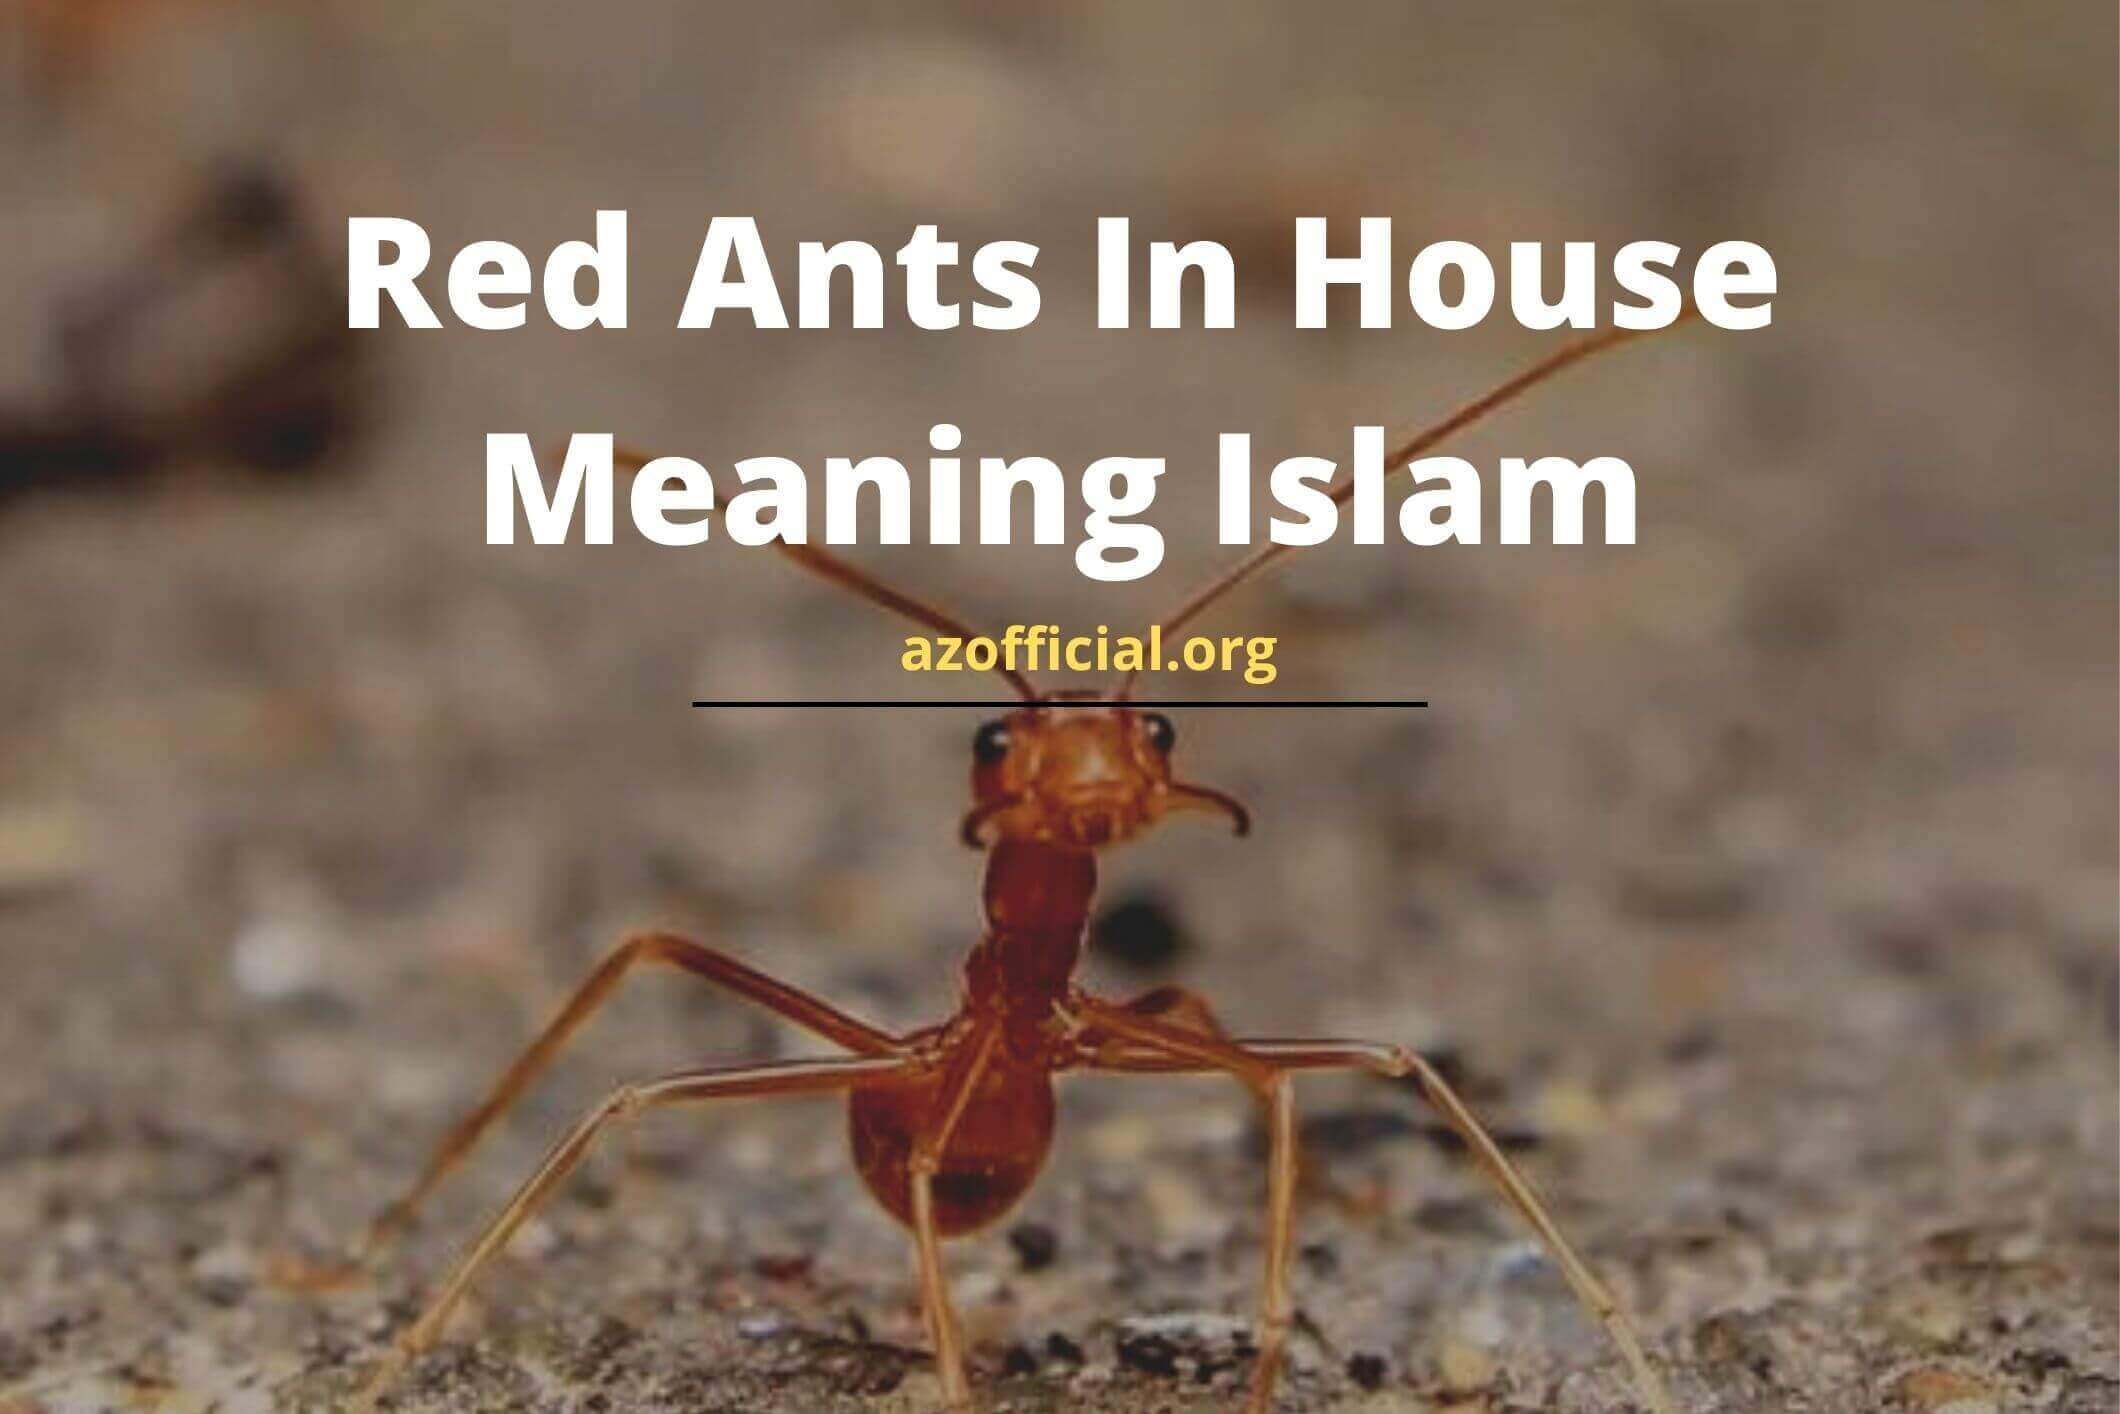 Red Ants In House Meaning Islam